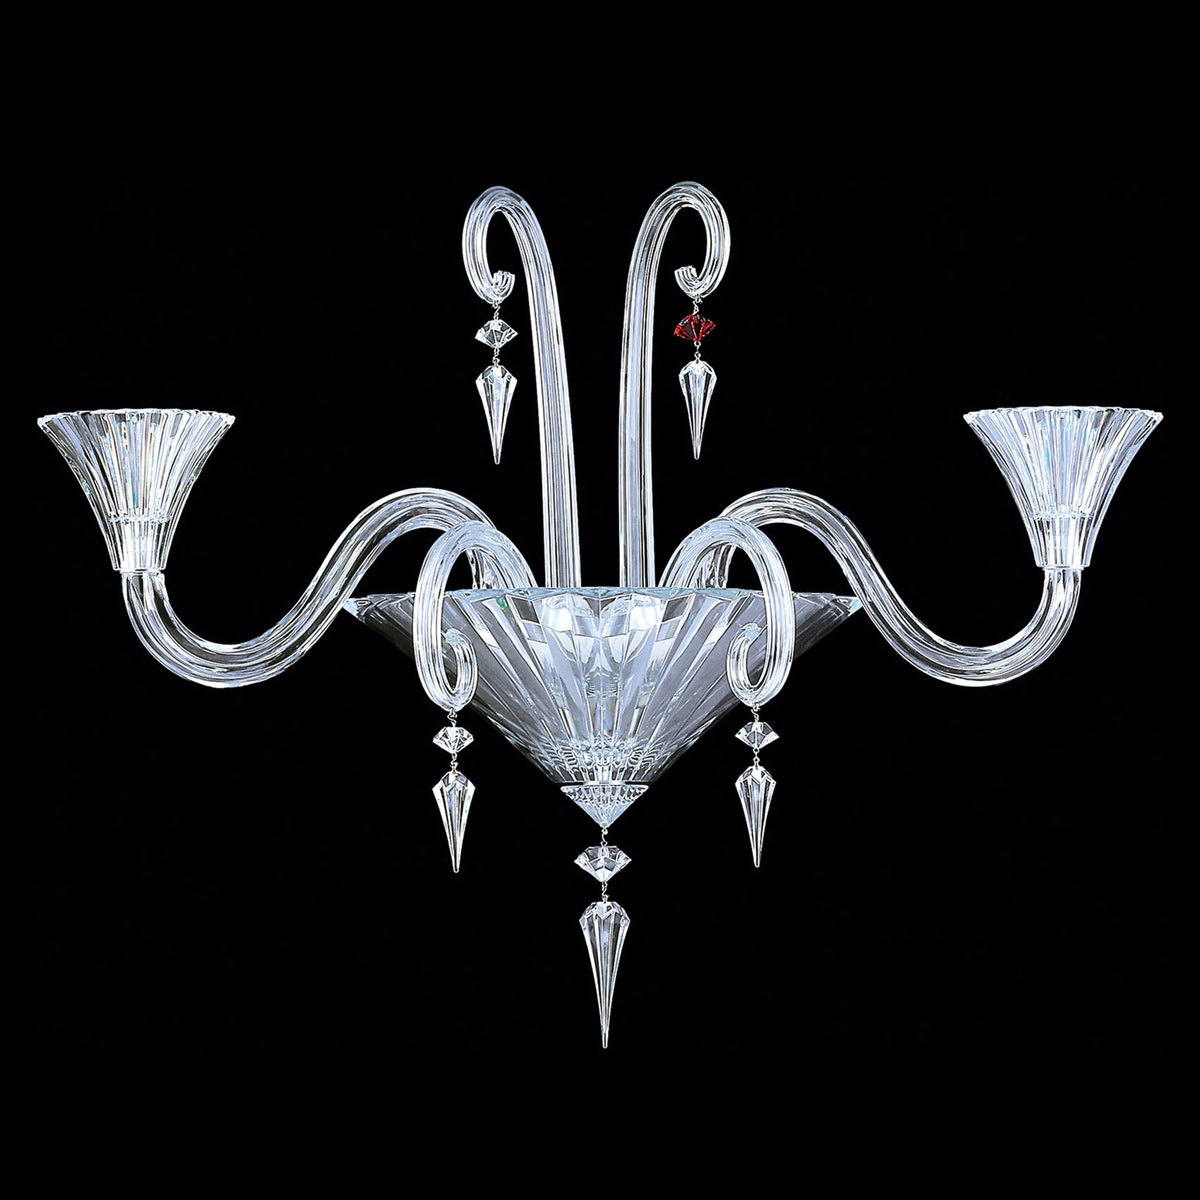 Baccarat Crystal, Mille Nuits 2 Light Wall Crystal Sconce